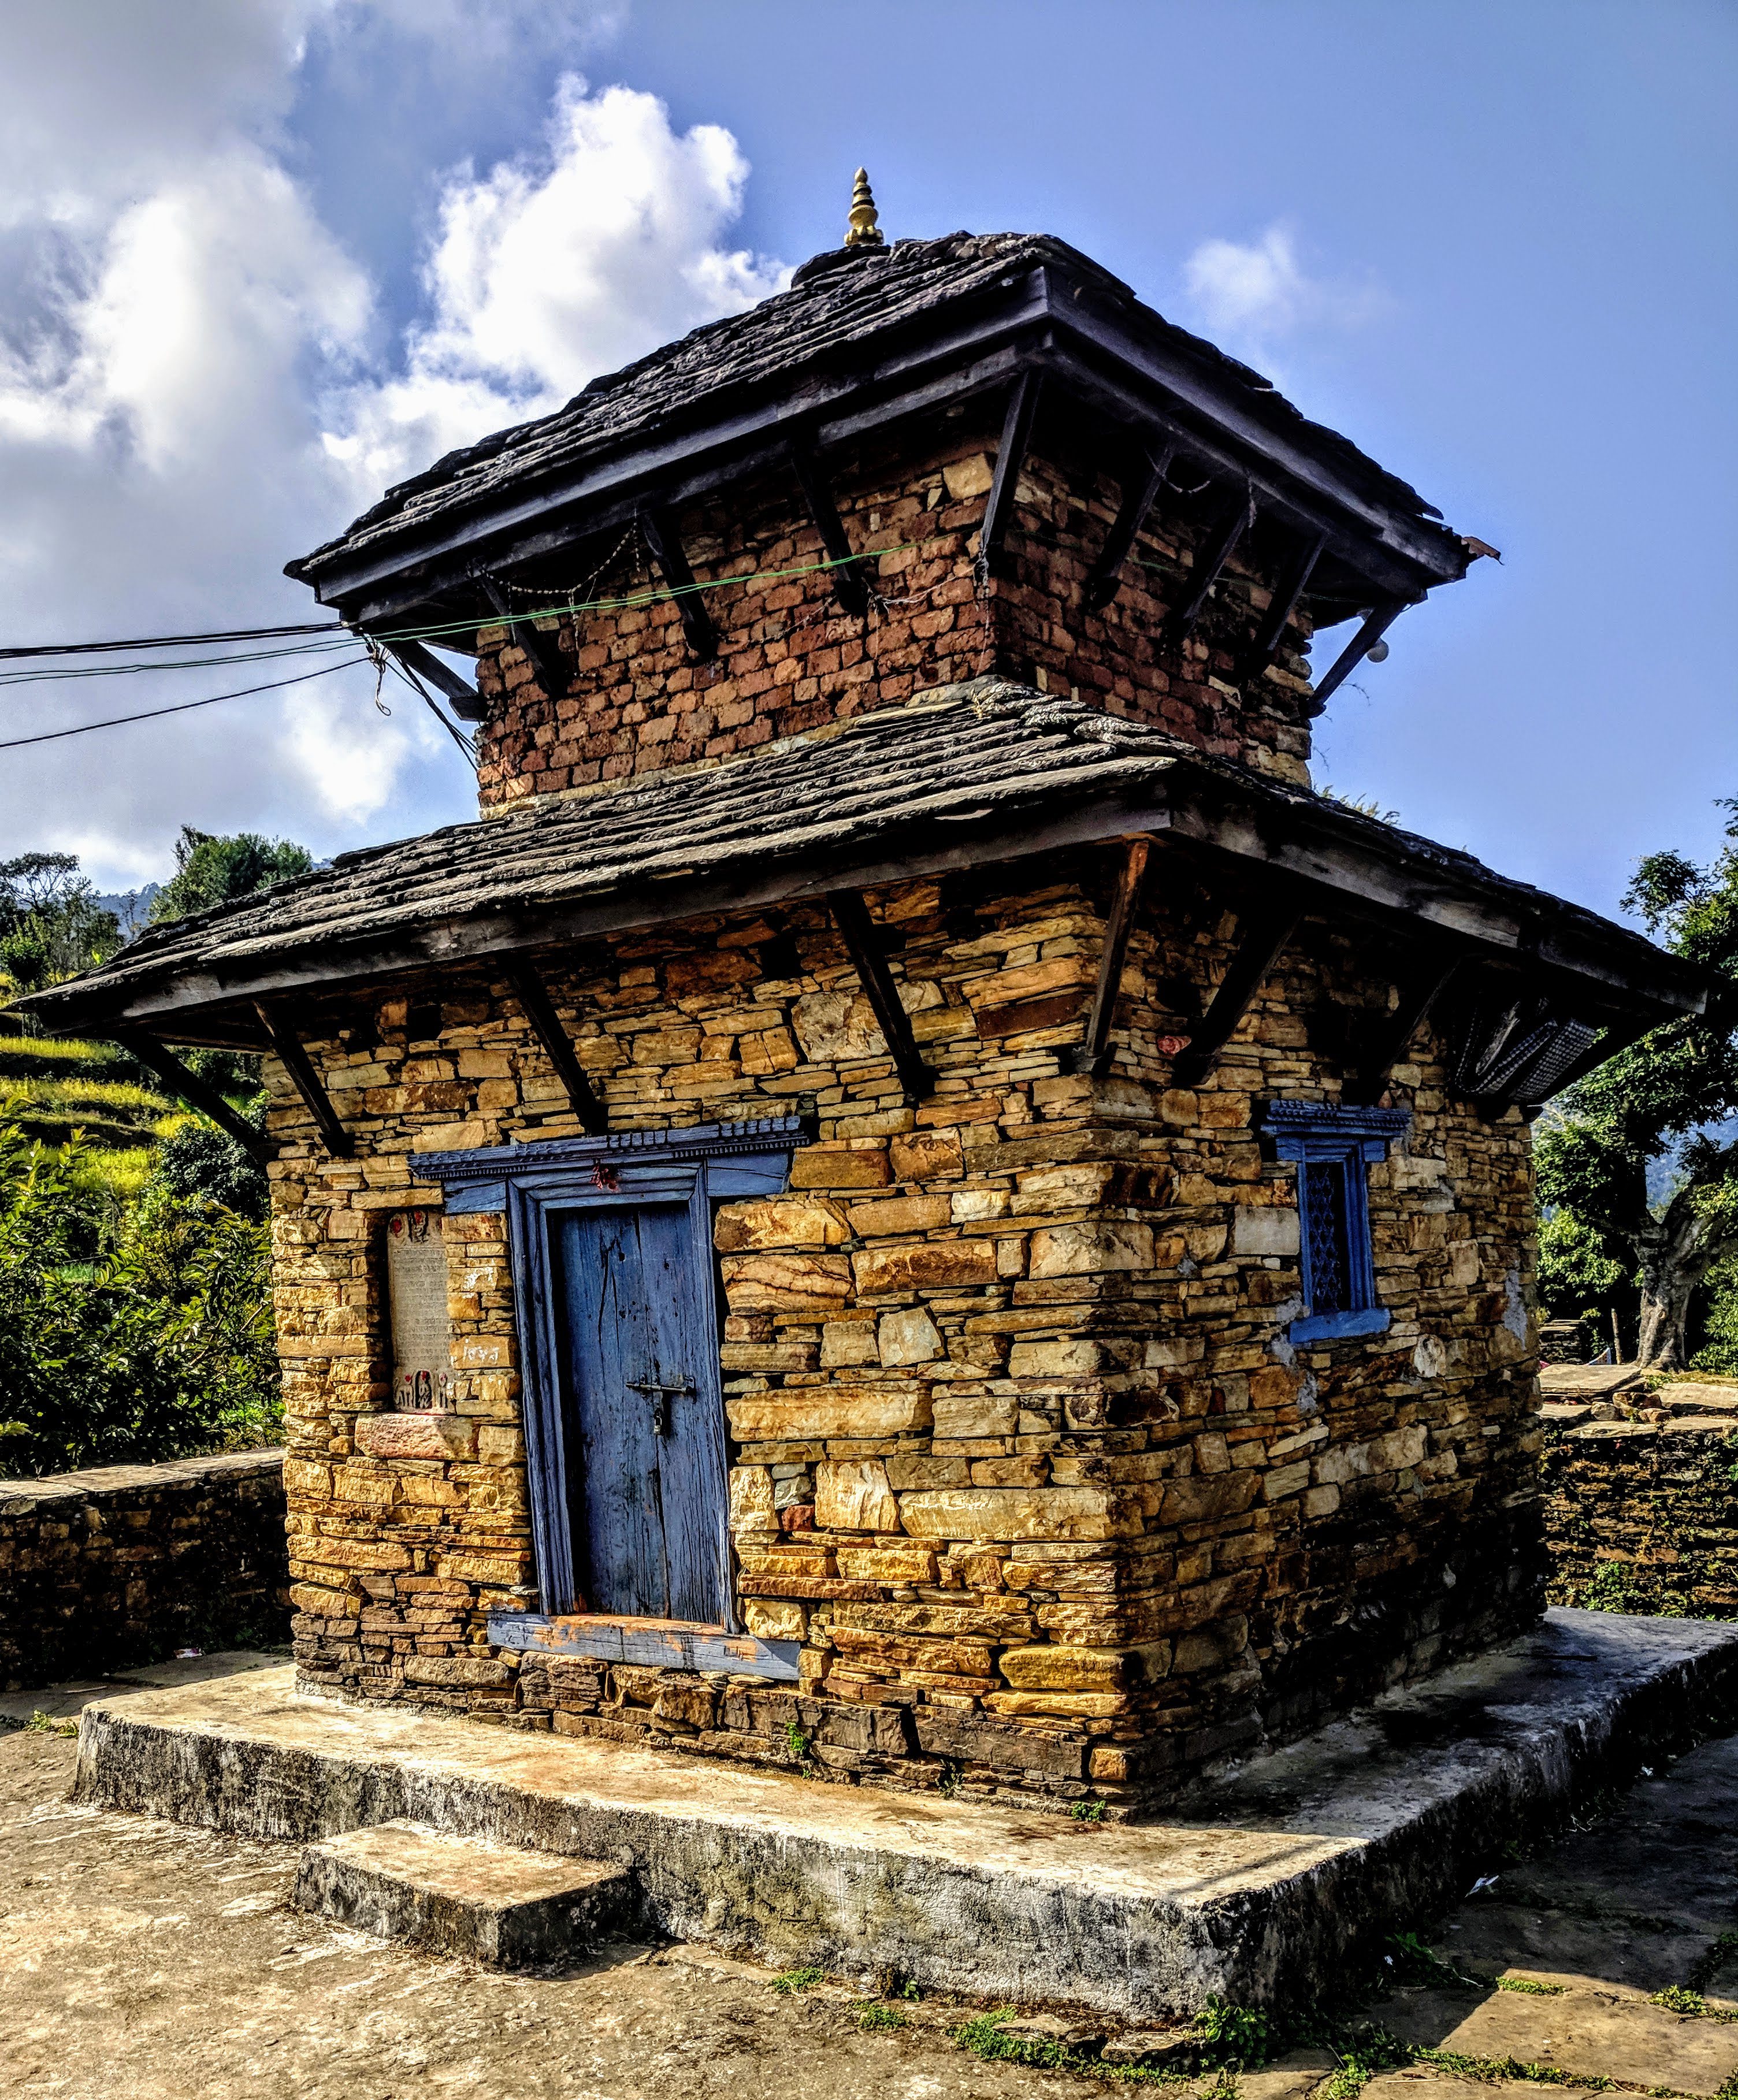 A temple in the village besides Lamjung durbar